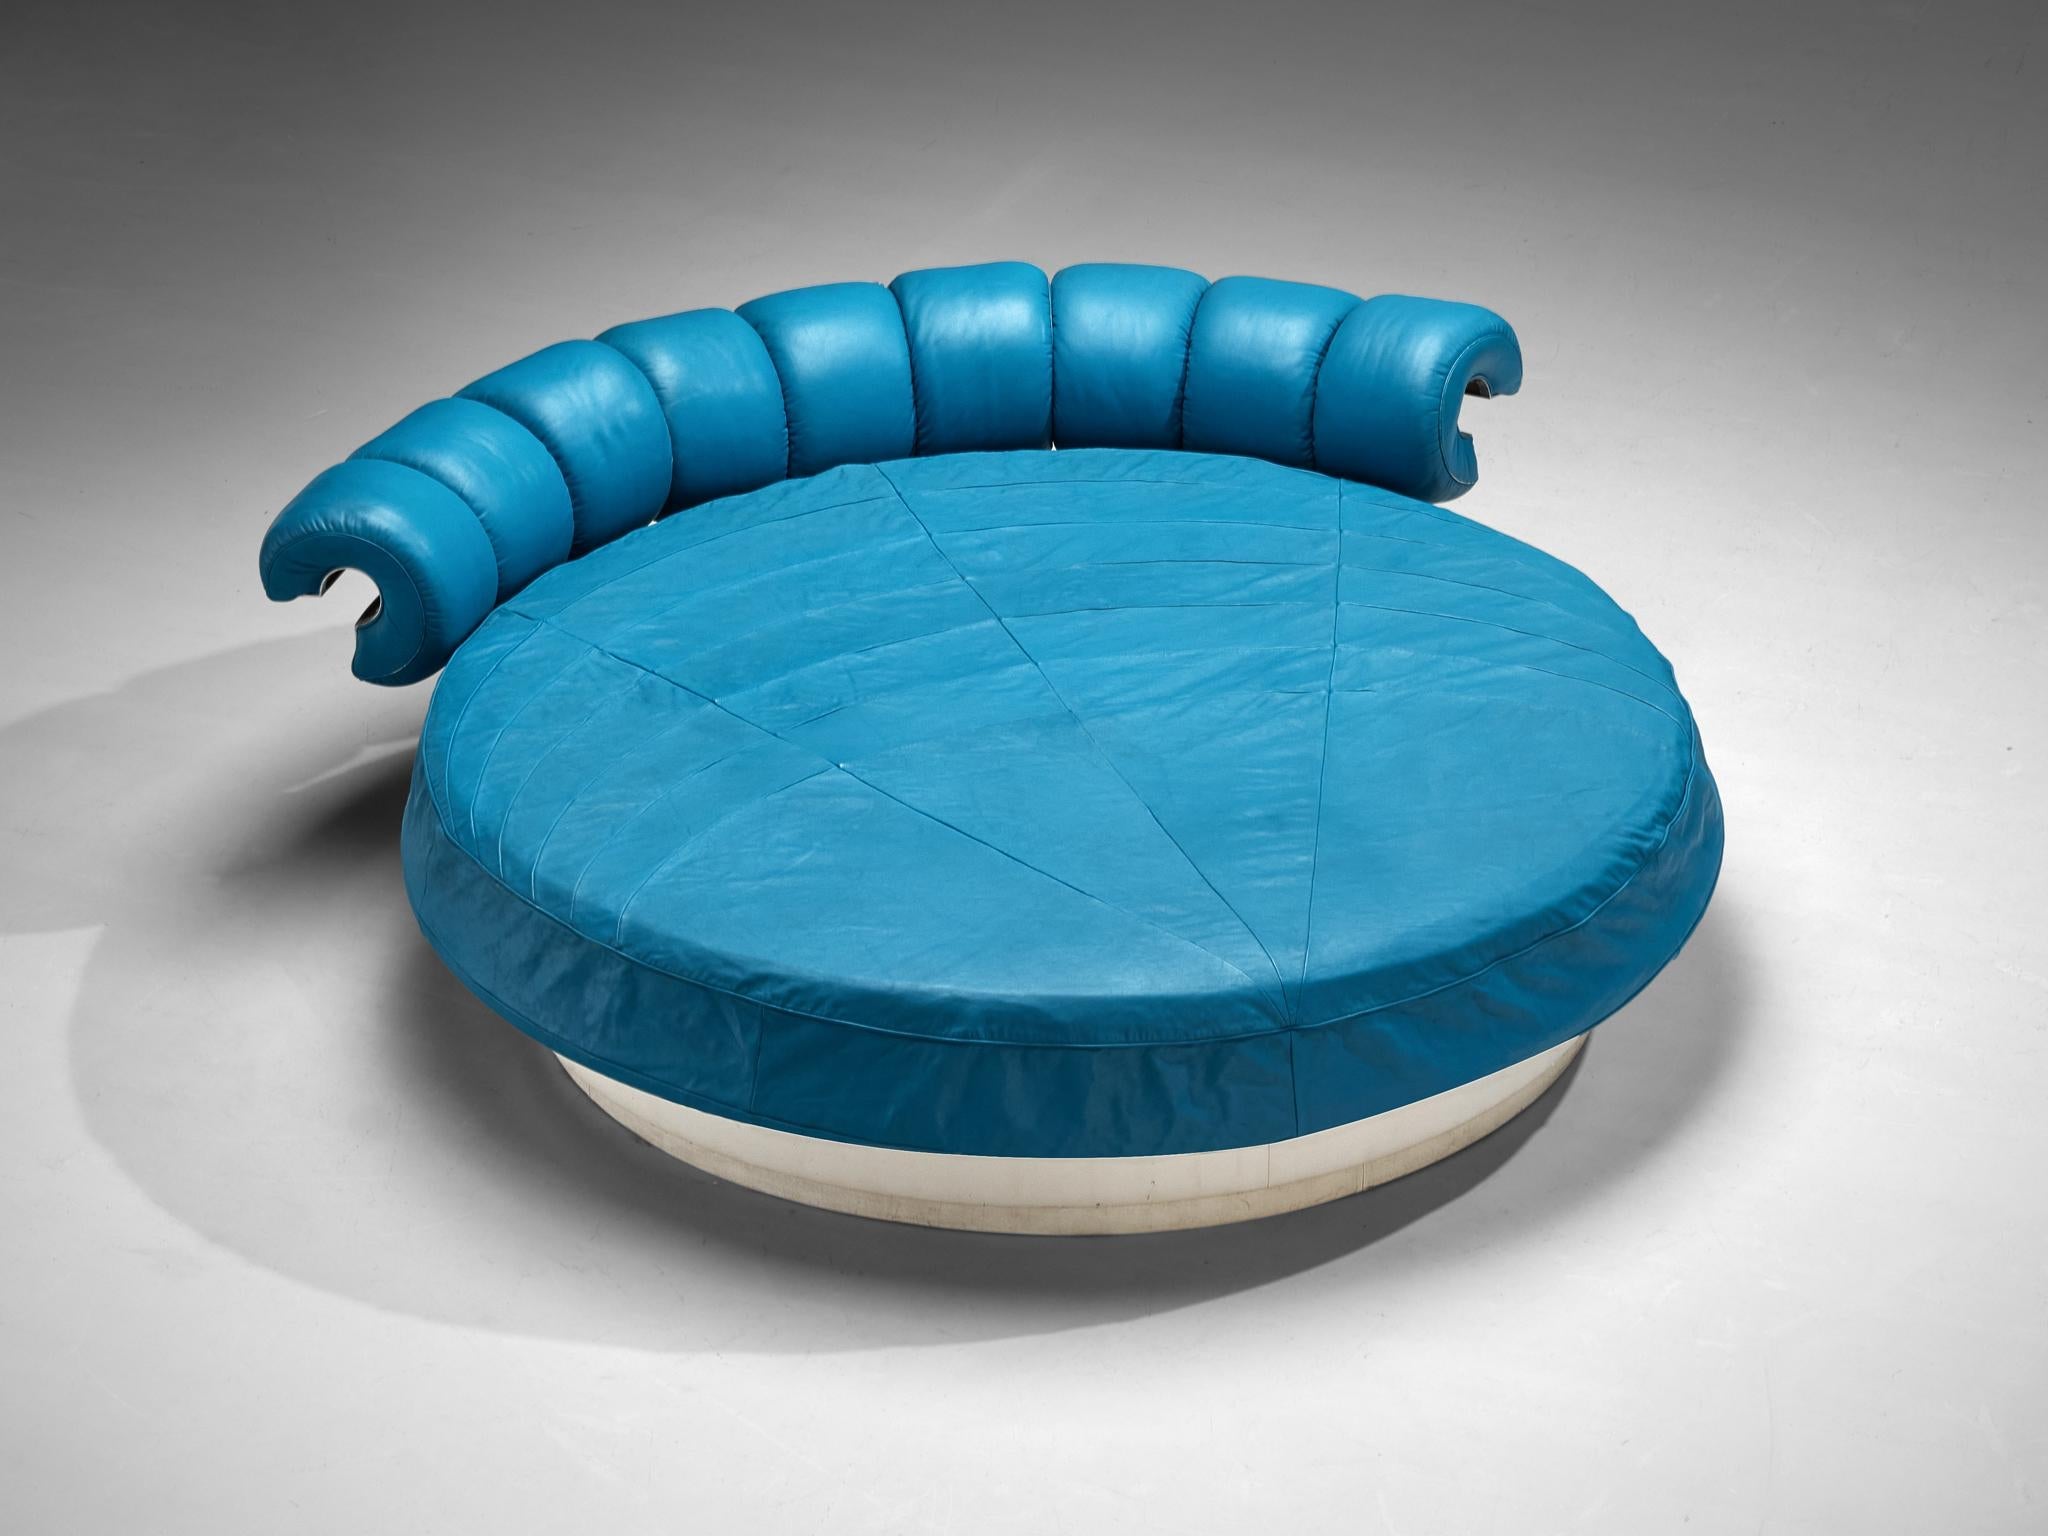 Luigi Massoni for Poltrona Frau 'Lullaby Due' Bed in Turquoise Blue